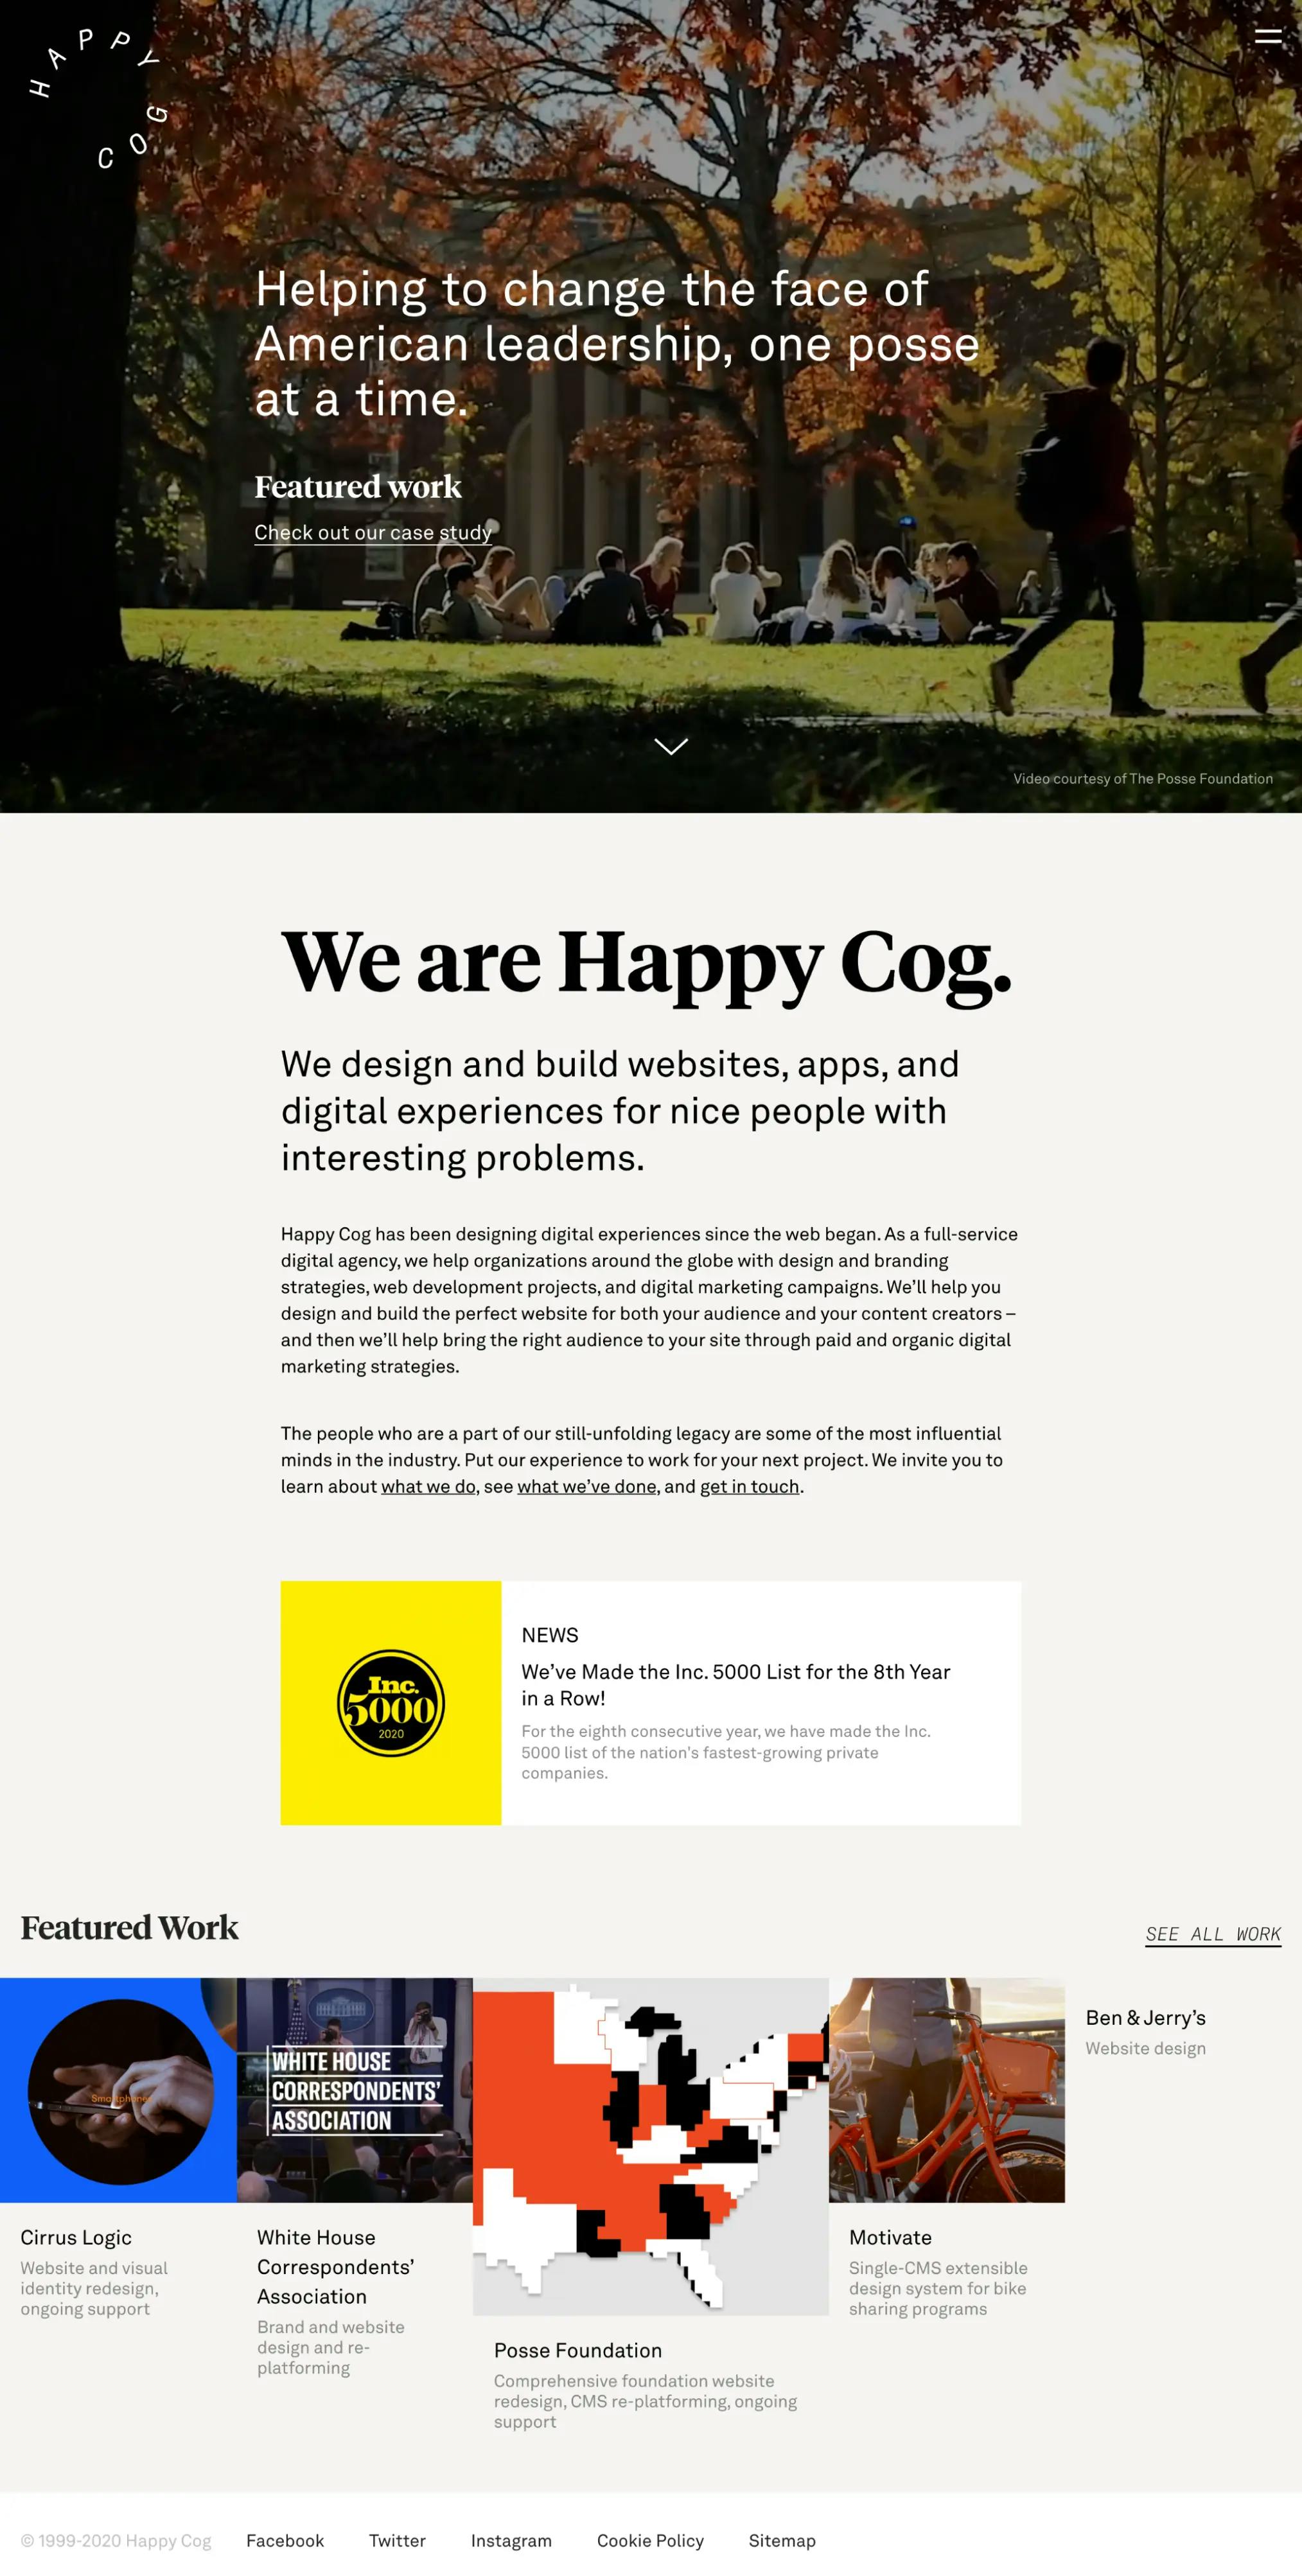 Screenshot of the desktop view of the Happy Cog's homepage with a featured project